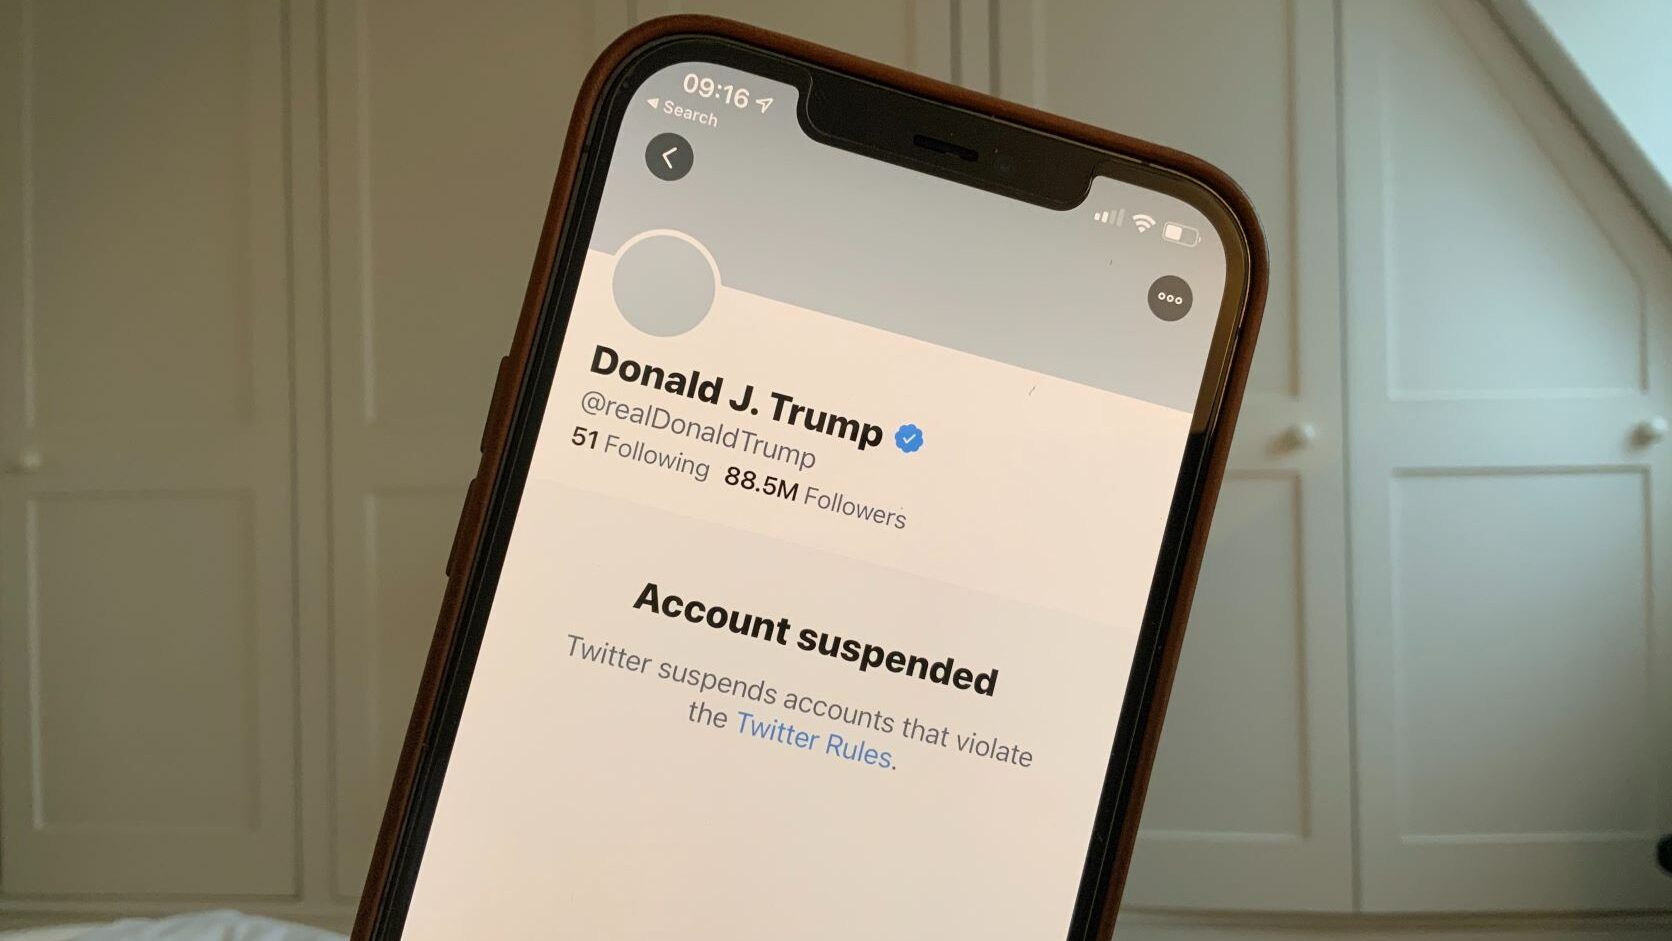 Donald Trump's Twitter account suspended